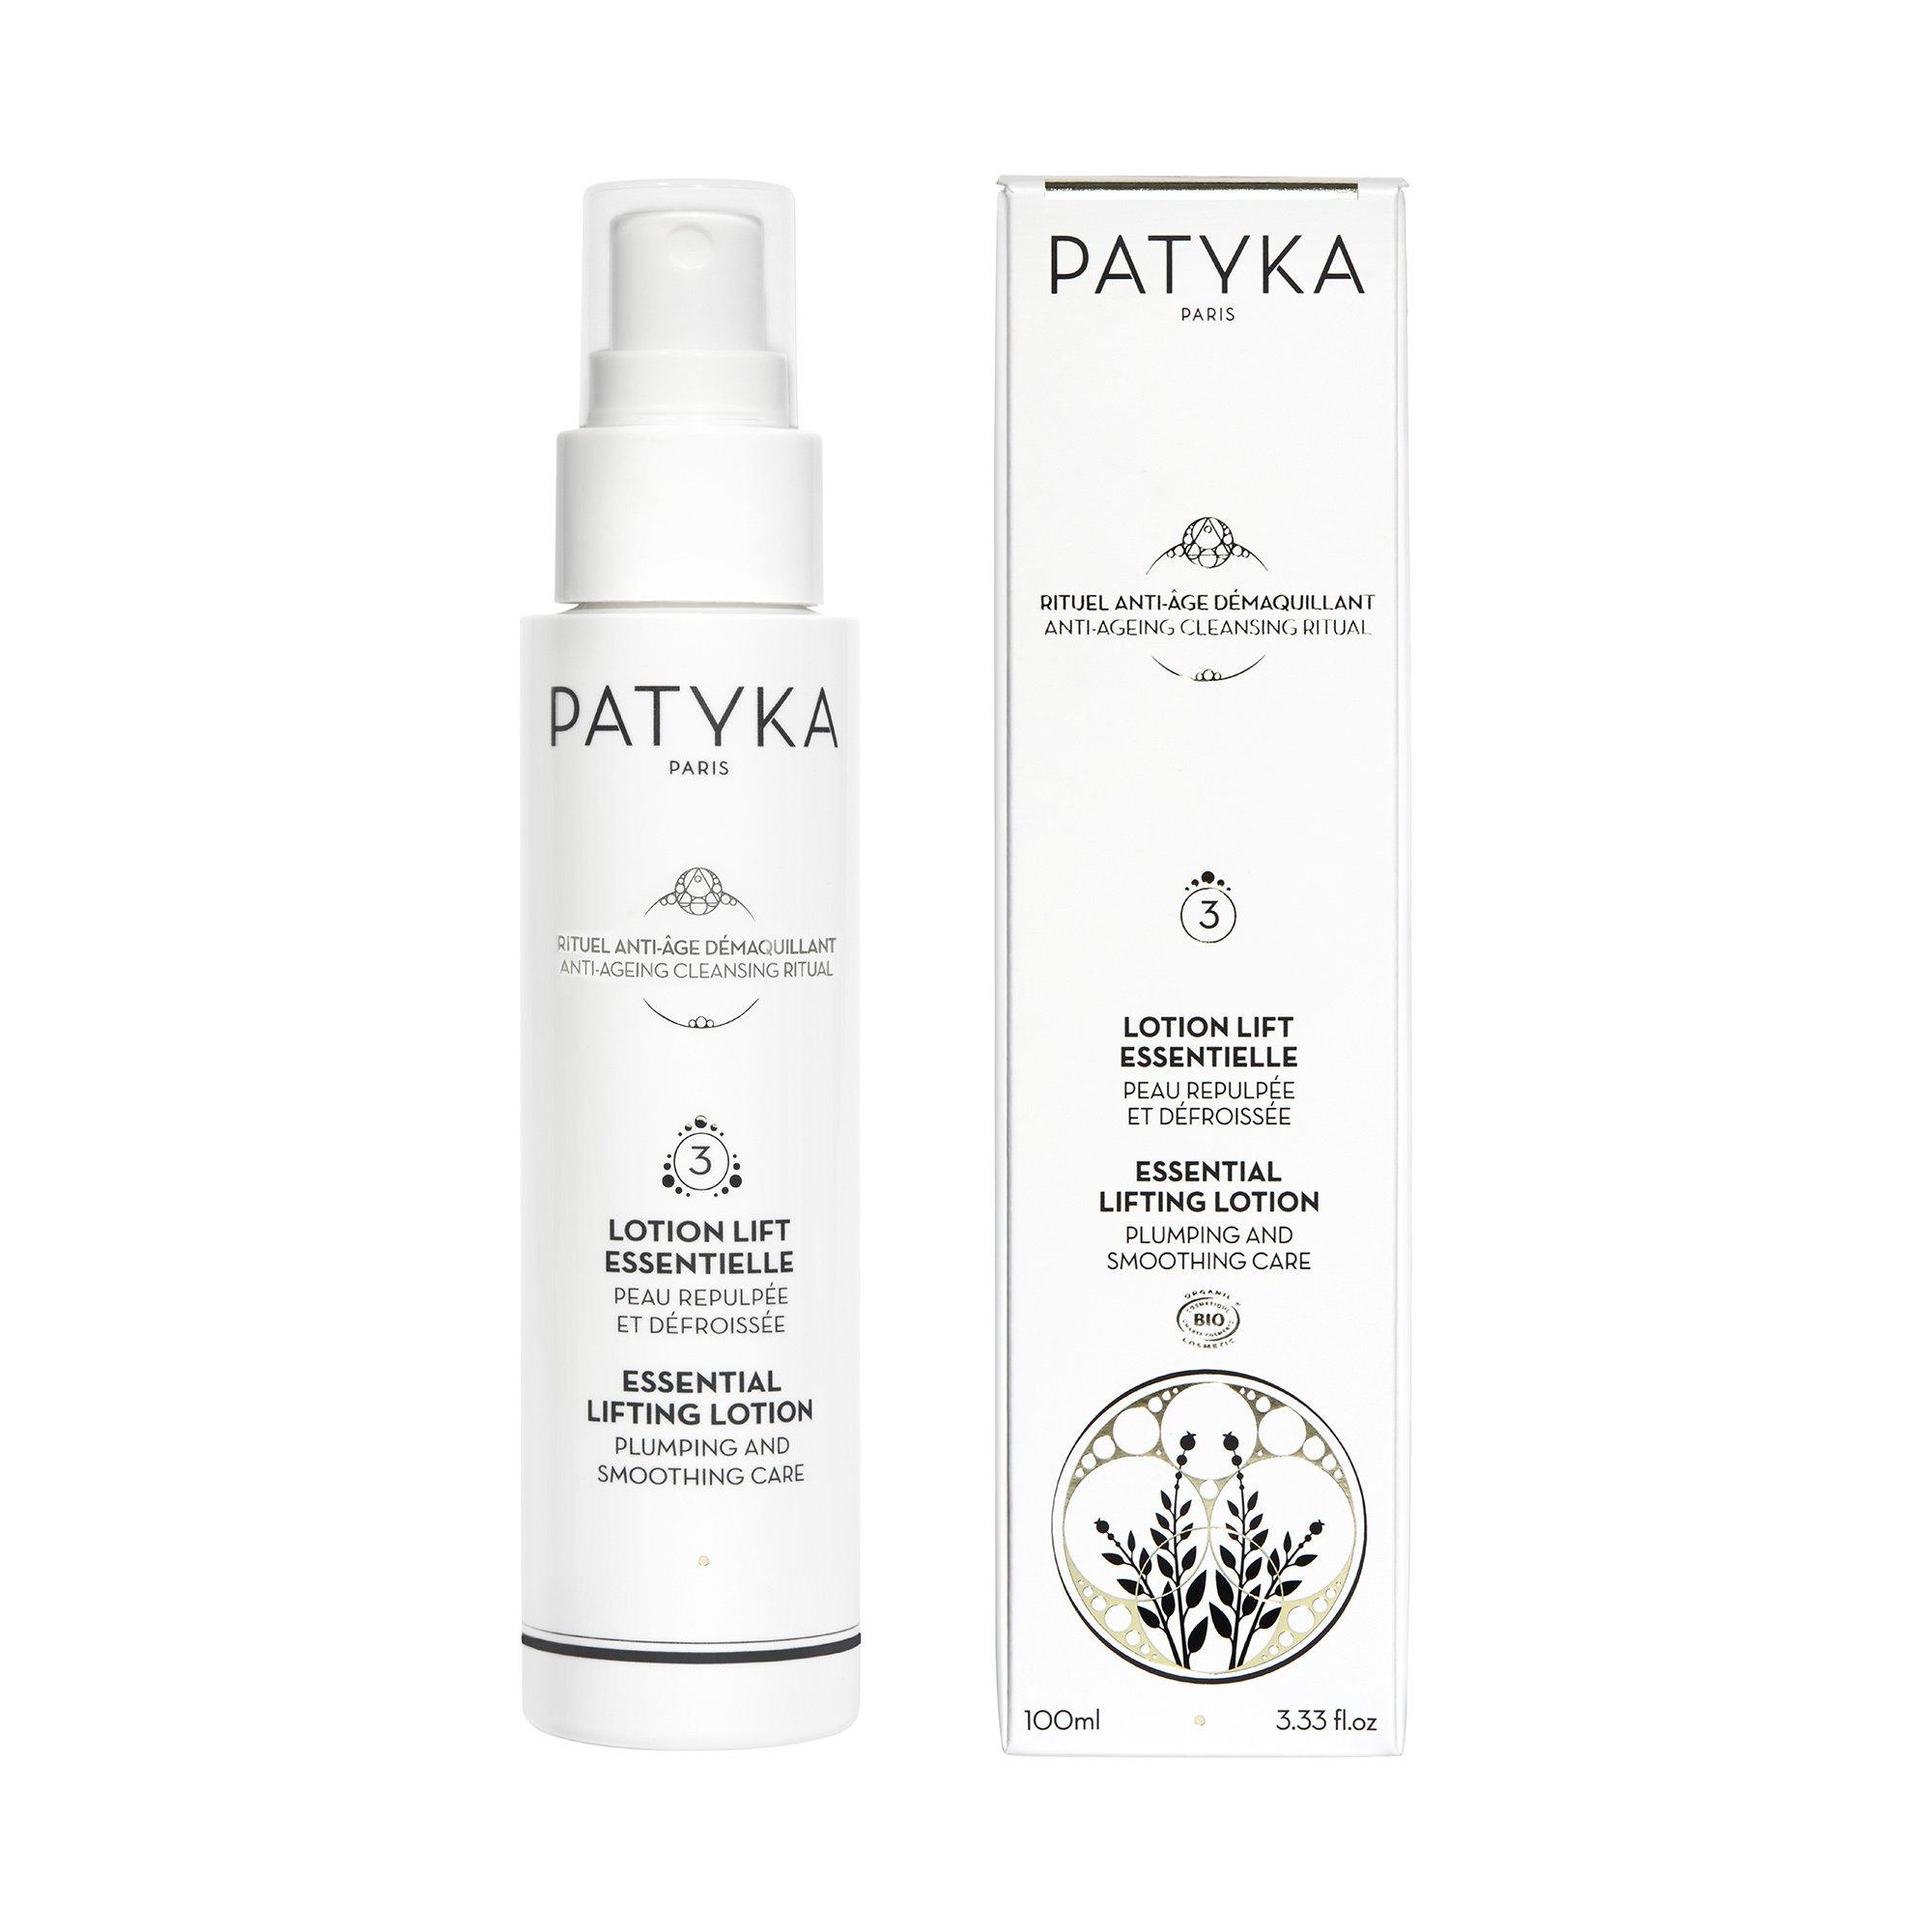 PATYKA ESSENTIAL LIFTING LOTION Lotion Lift Essentielle 